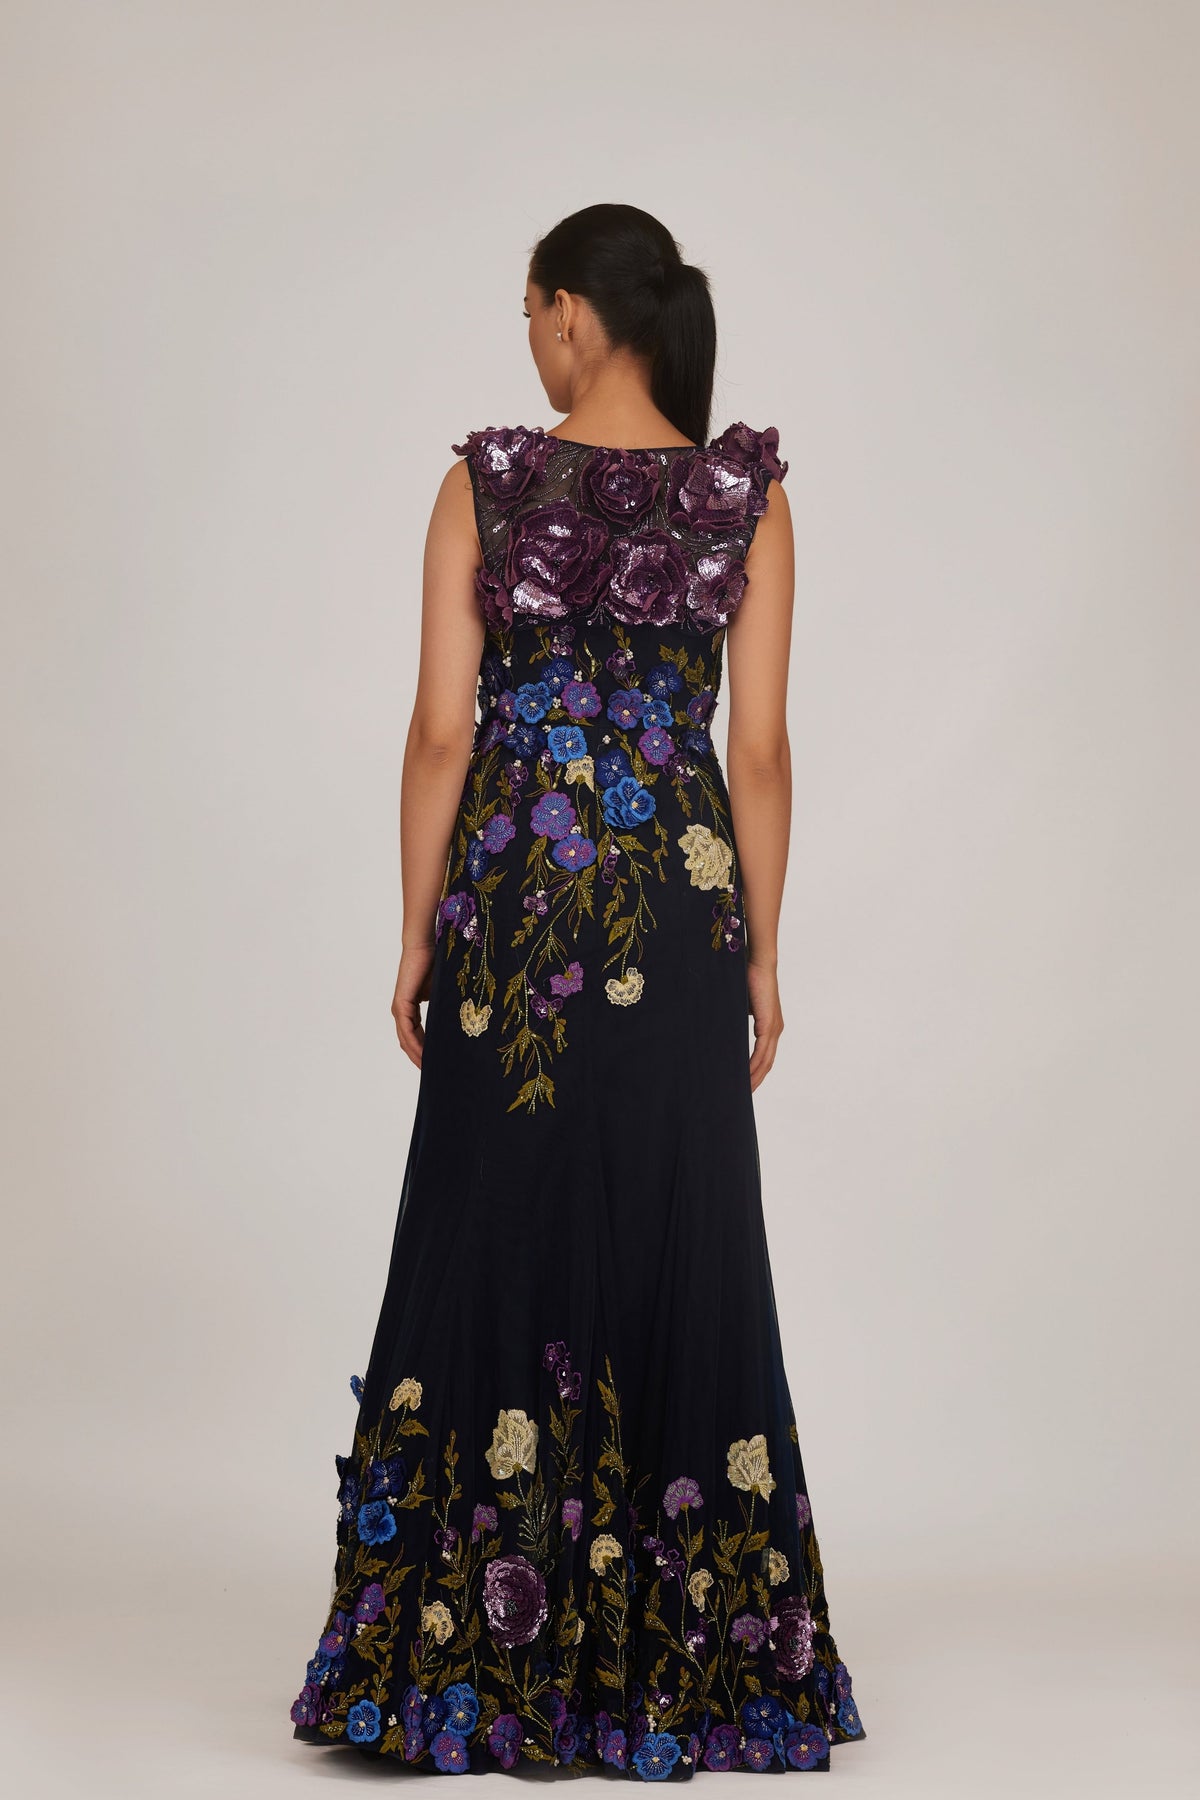 Floral Embellished Fishtail Gown